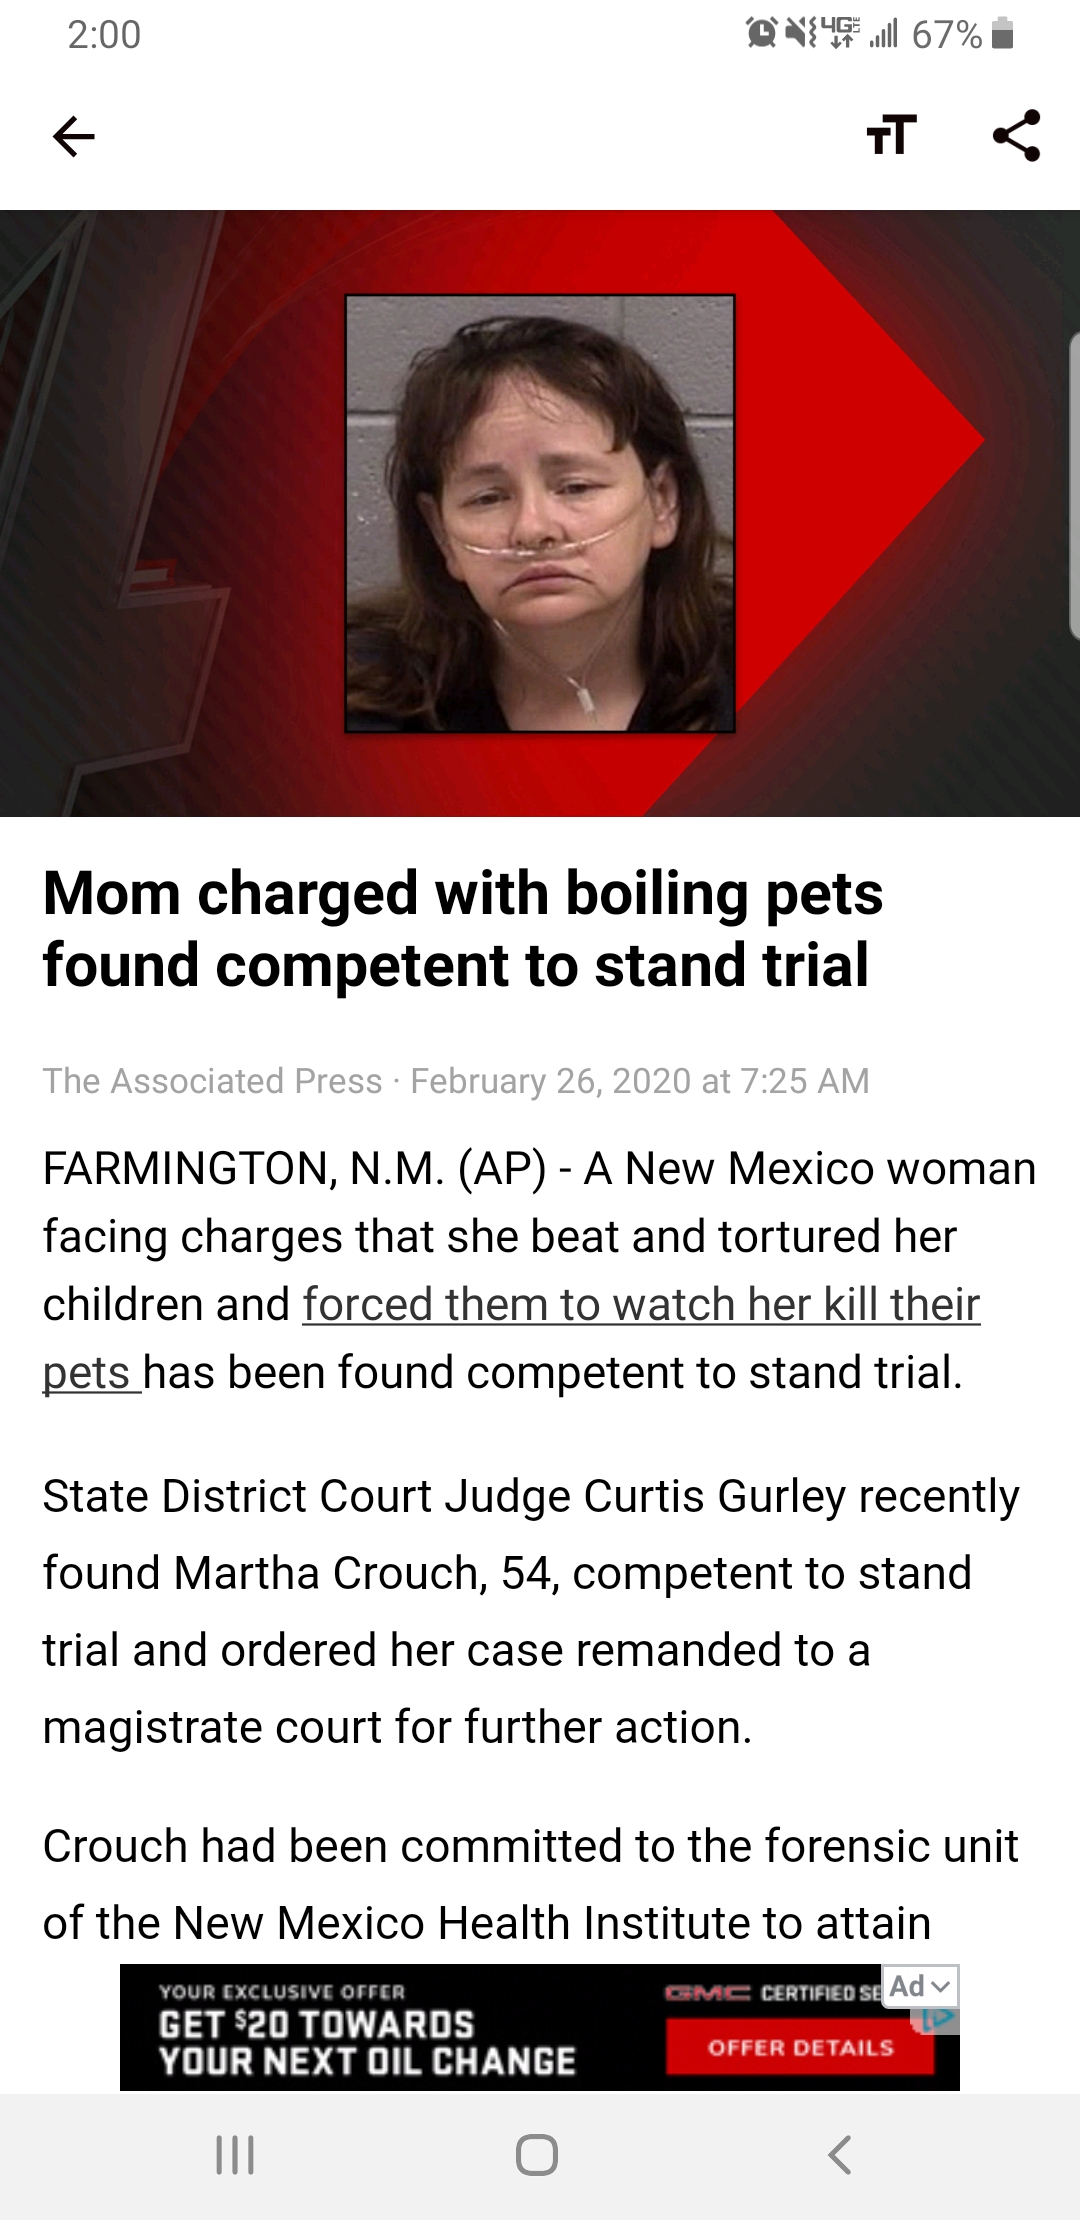 insane parents - screenshot - 419 467%. Mom charged with boiling pets found competent to stand trial The Associated Press Fabruary 26, 2020 at Farmington, N.M. Ap A New Mexico woman facing charges that she beat and tortured her children and forced them to